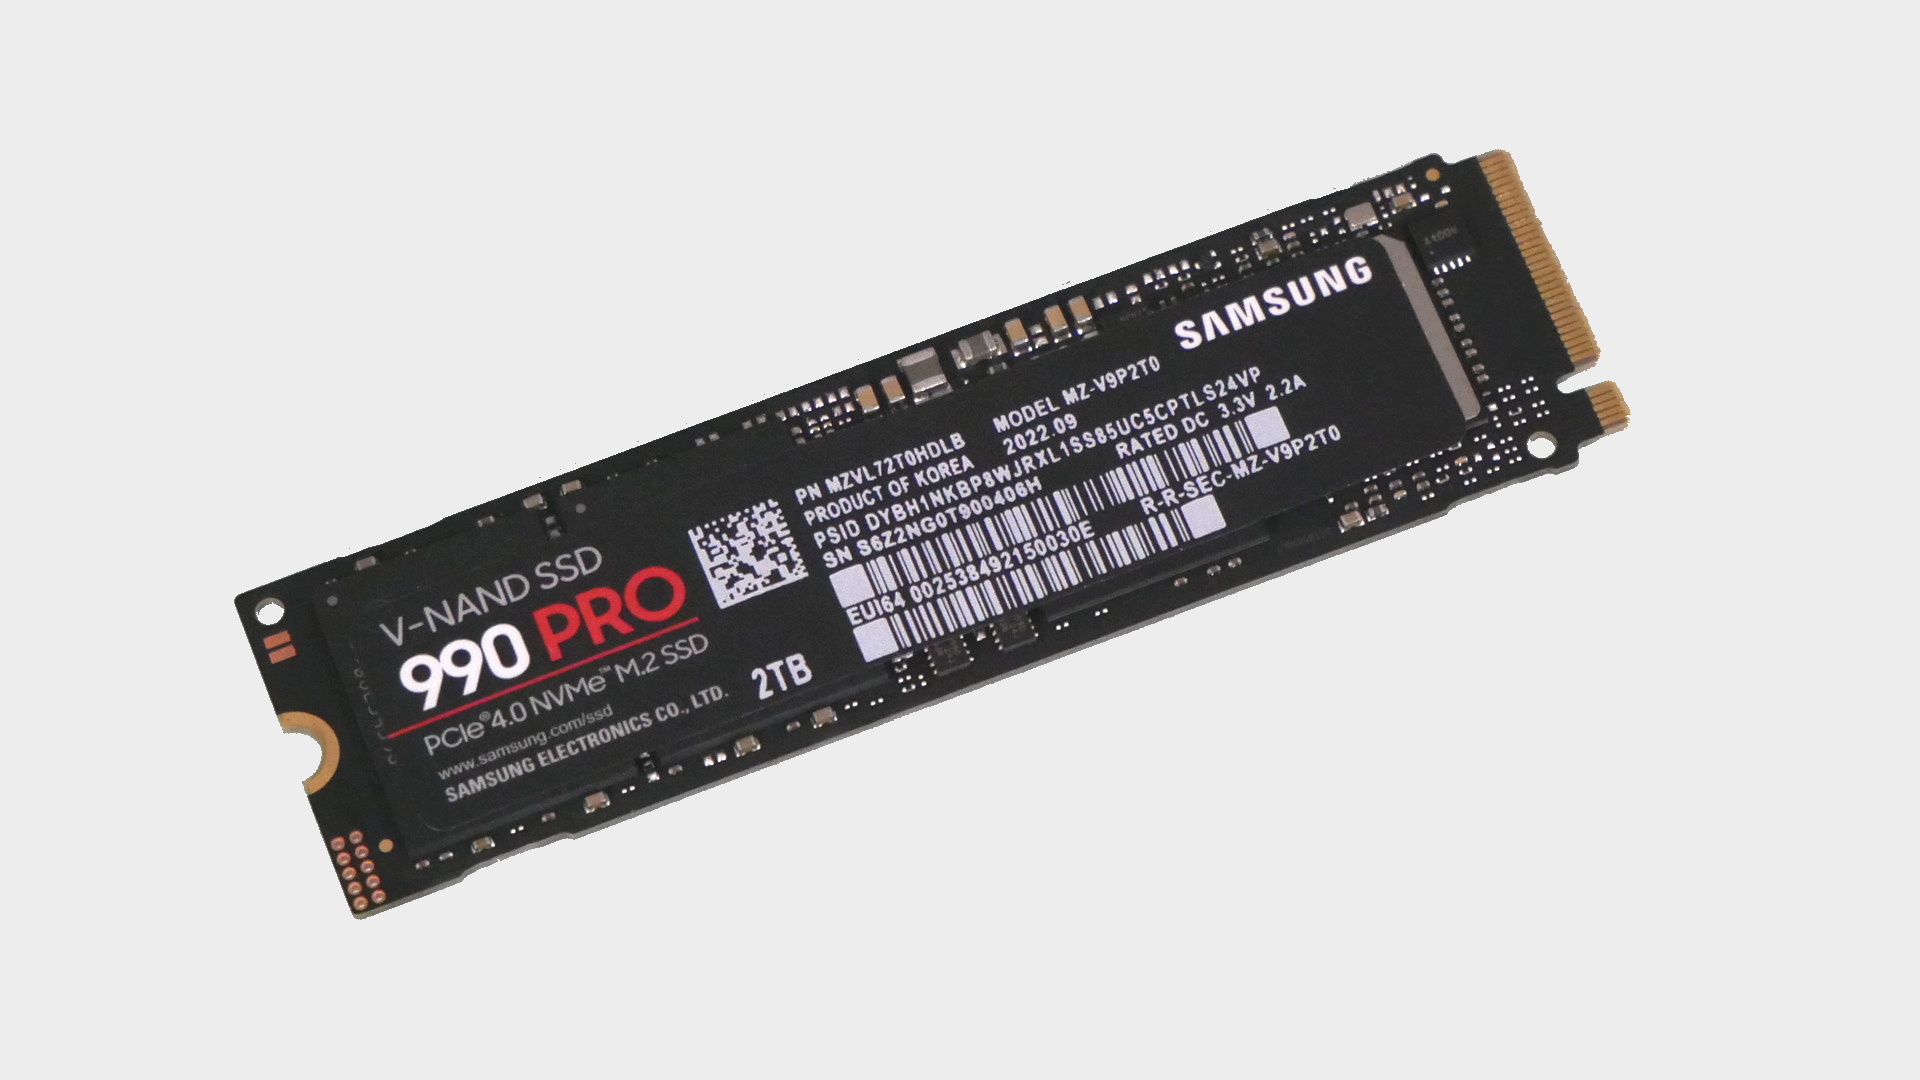 Samsung 990 Pro 2TB PCIe 4.0 NVMe SSD review